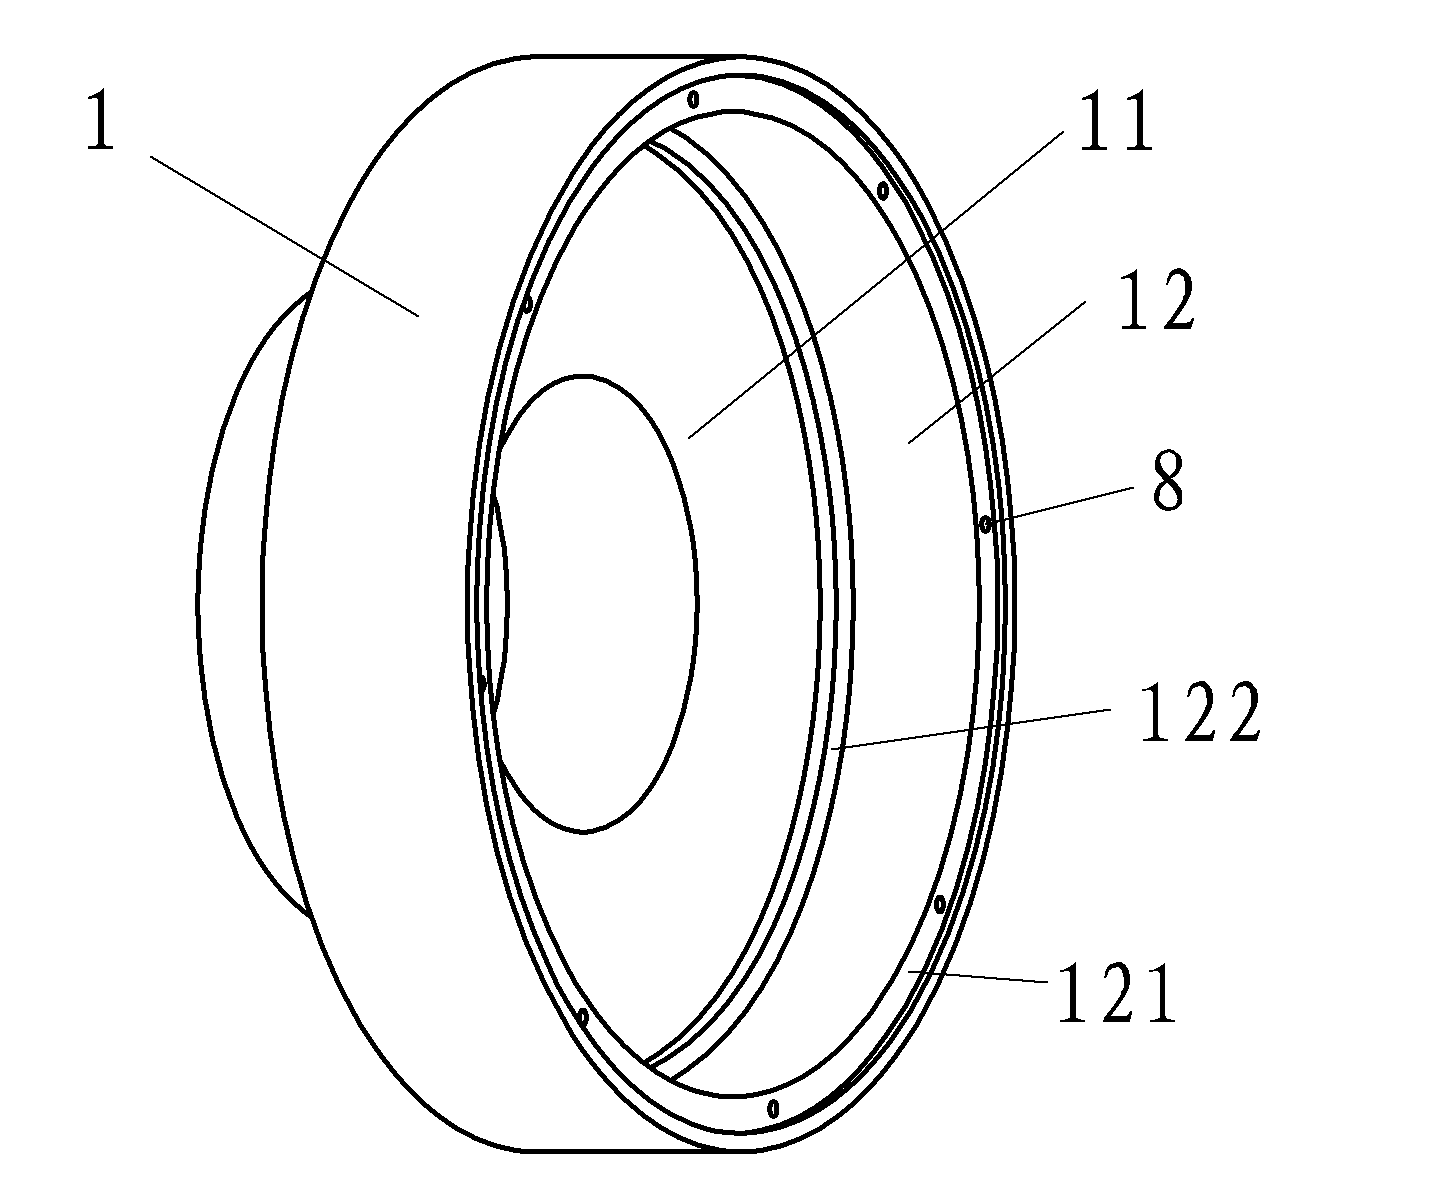 Motor rotor of permanent-magnetic synchronous tractor